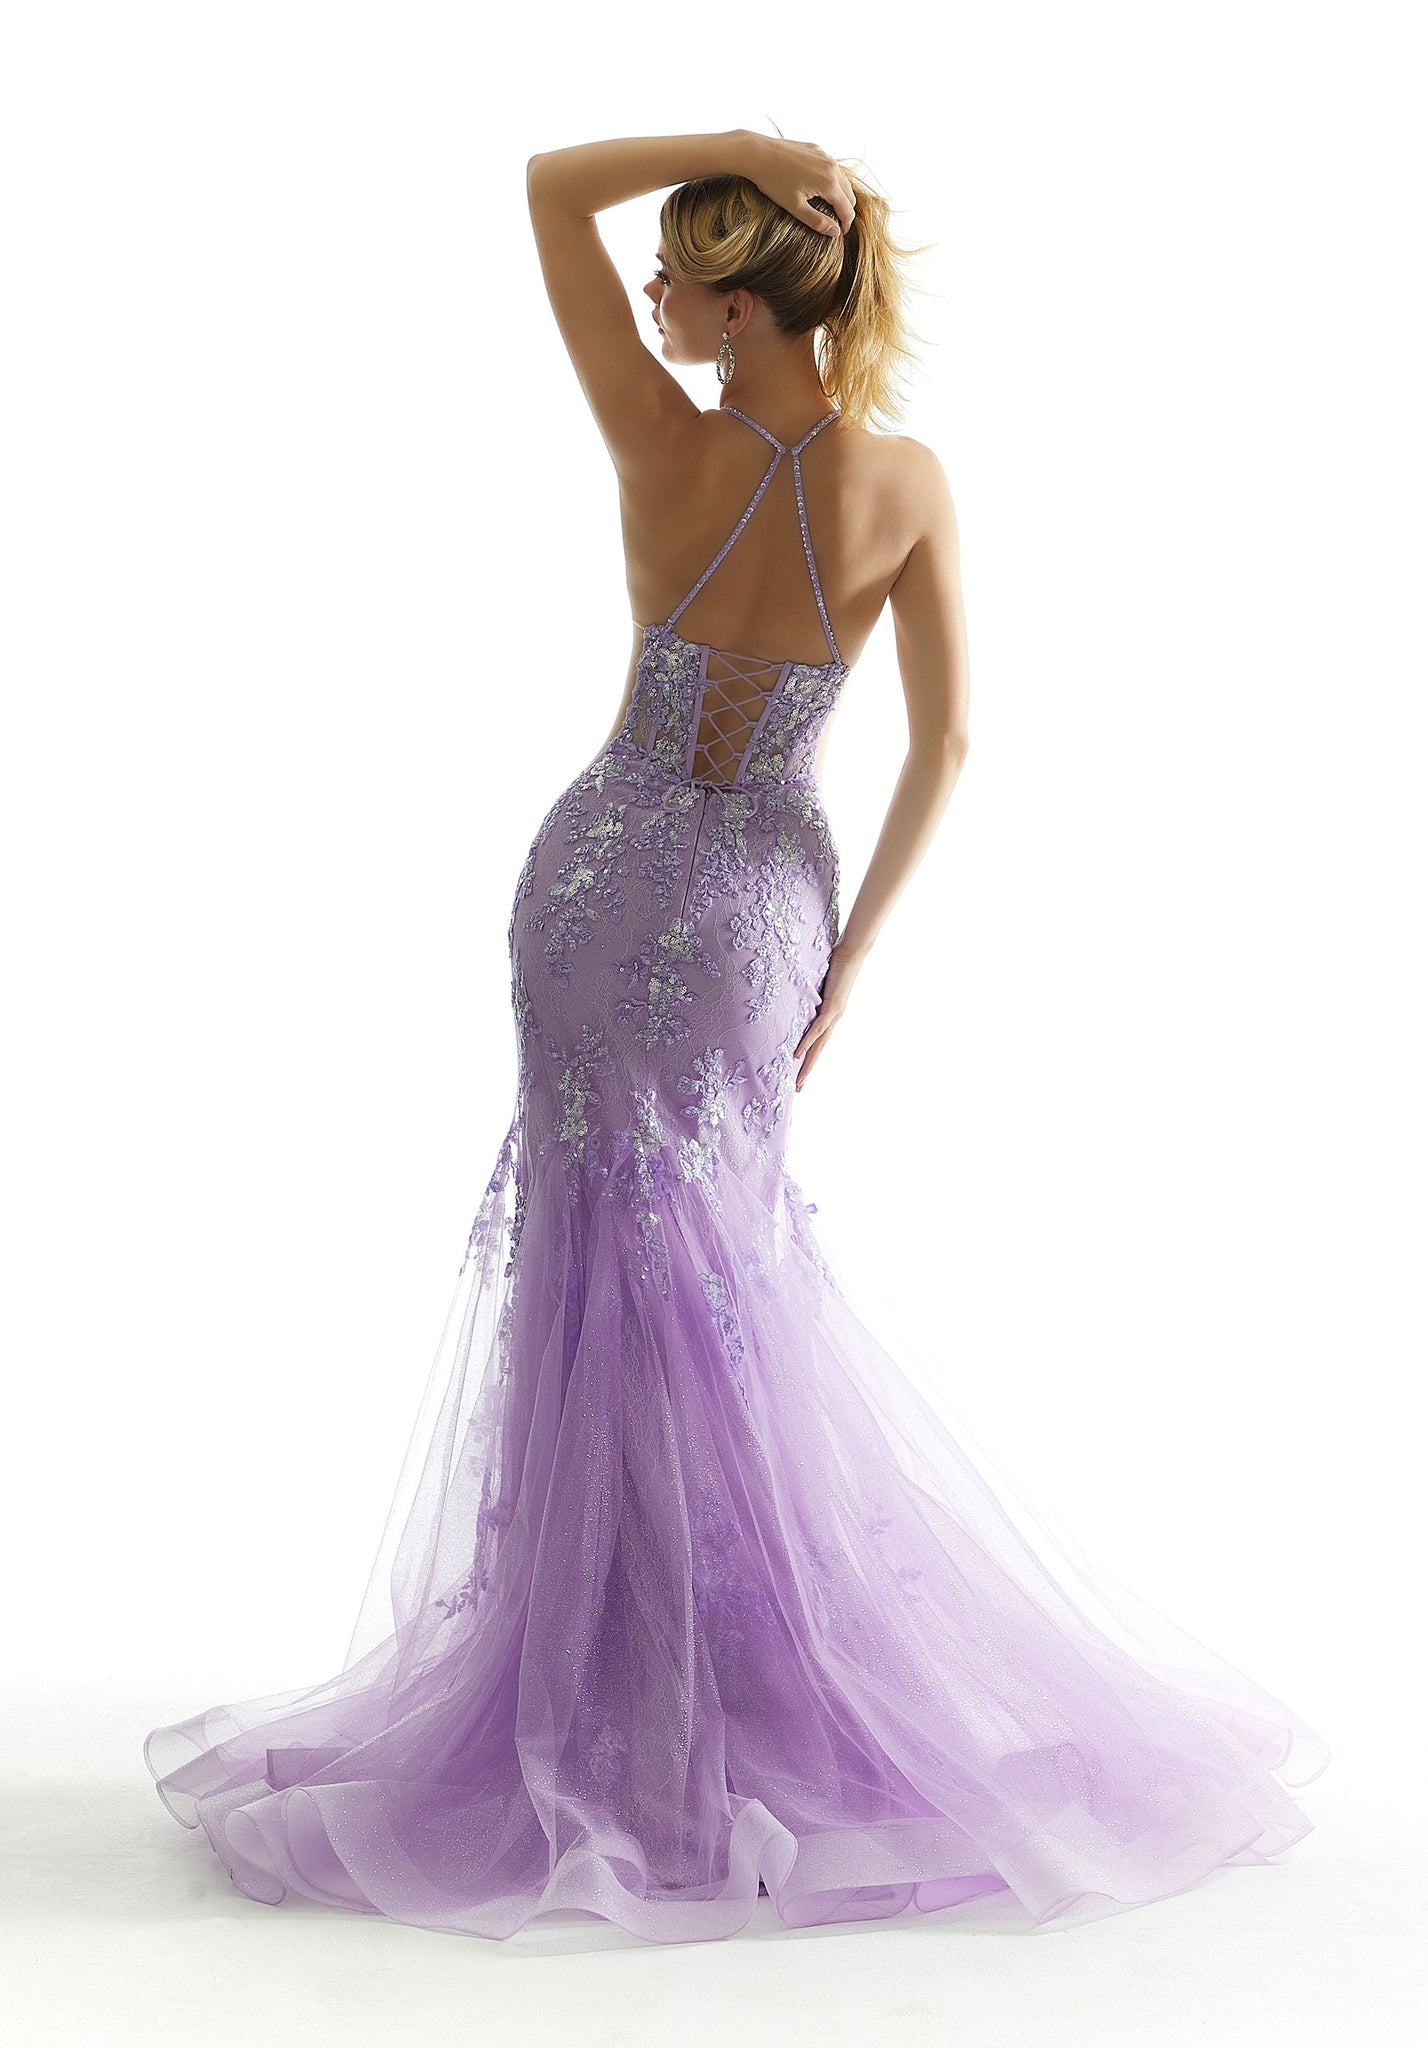 Red carpet ready, this astonishing mermaid Morilee gown 49073 will mesmerize all in sight. Showcasing a sophisticated high halter neckline, sheer midriff panels accentuate your figure beautifully. Flattering on all the lace up closure defines your figure, highlighting your hourglass silhouette. Gleaming beaded appliques adorn the entire silhouette giving this gown the perfect pop of glitz.